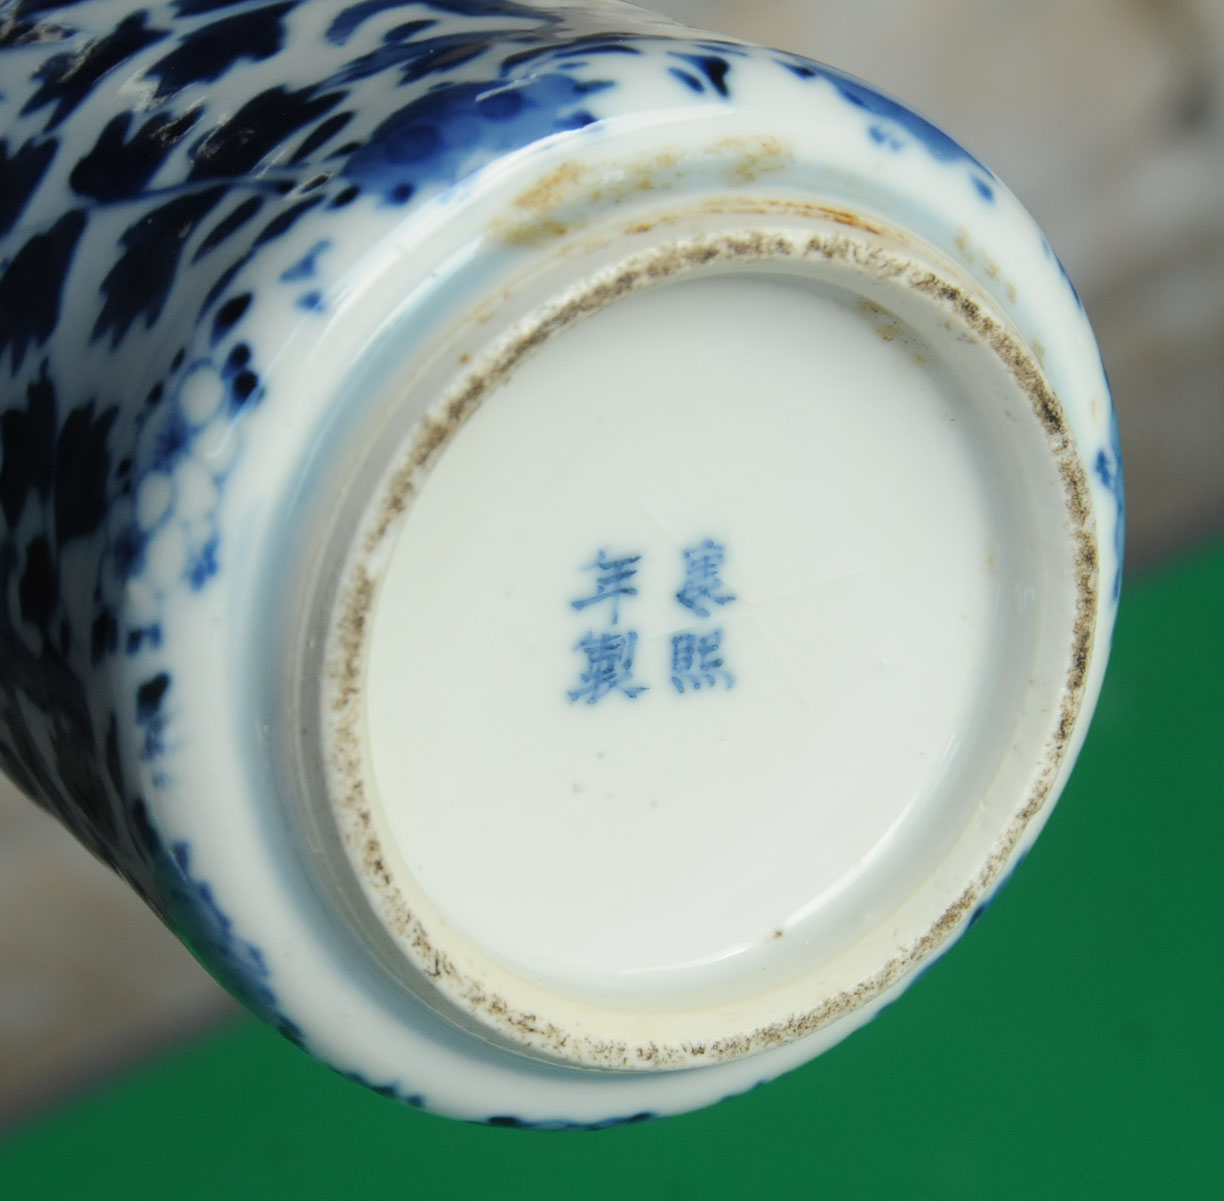 A 19th century Chinese porcelain vase, decorated with dragons and chrysanthemum, - Image 8 of 8